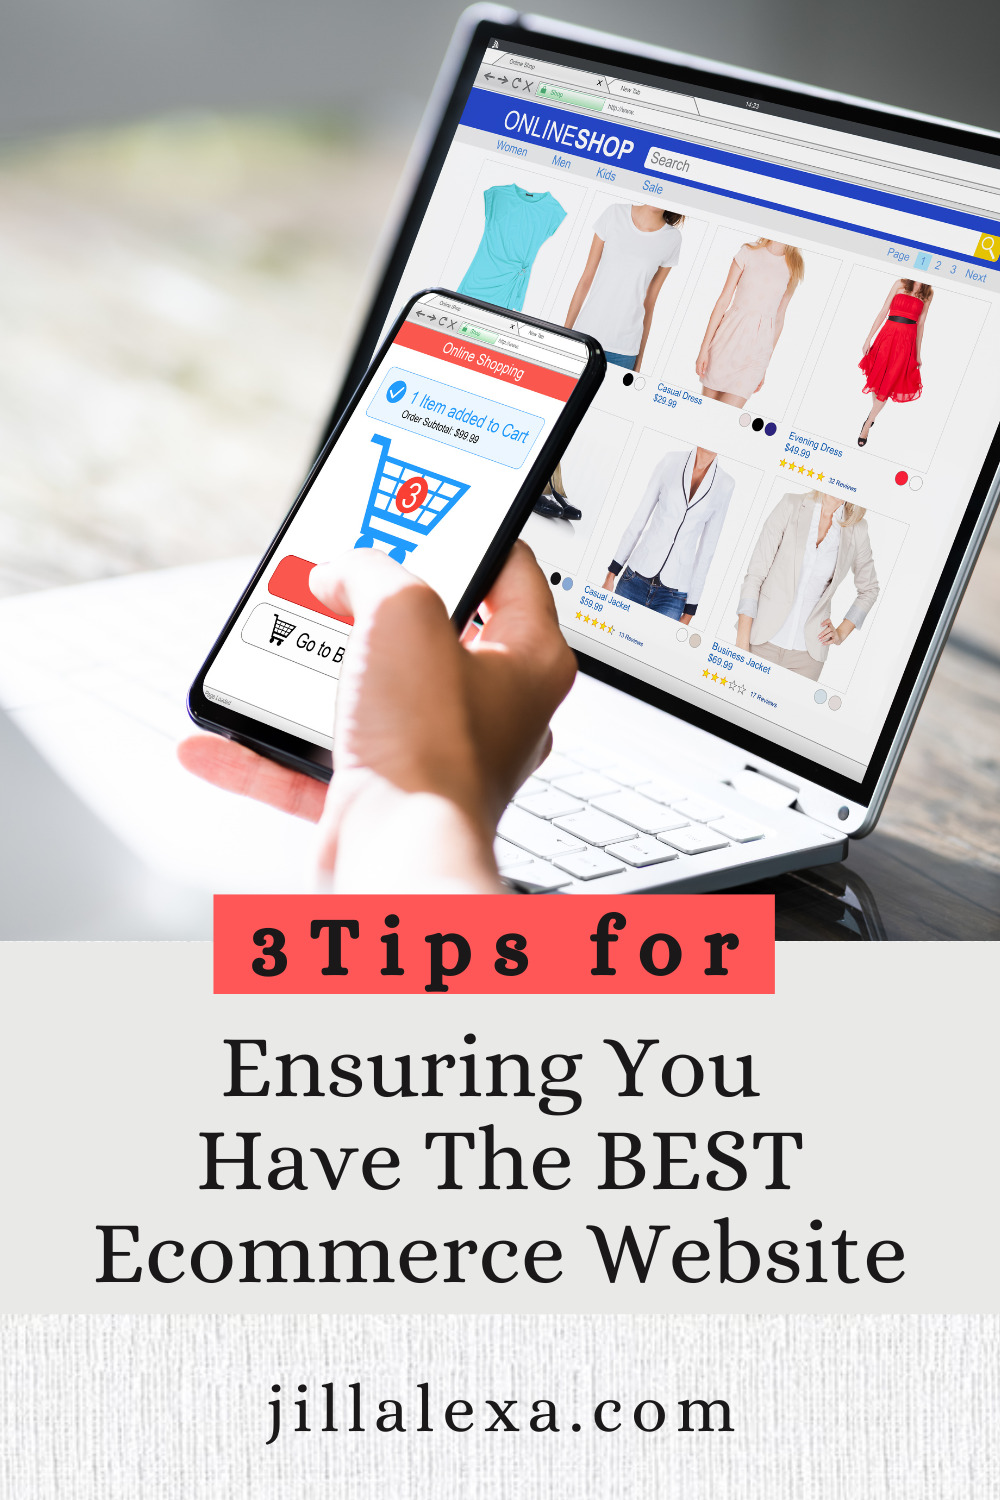 Are you setting up an ecommerce website? Here are 3 tips to ensure it's the best ecommerce site it can be so you can start bringing in sales while you sleep.